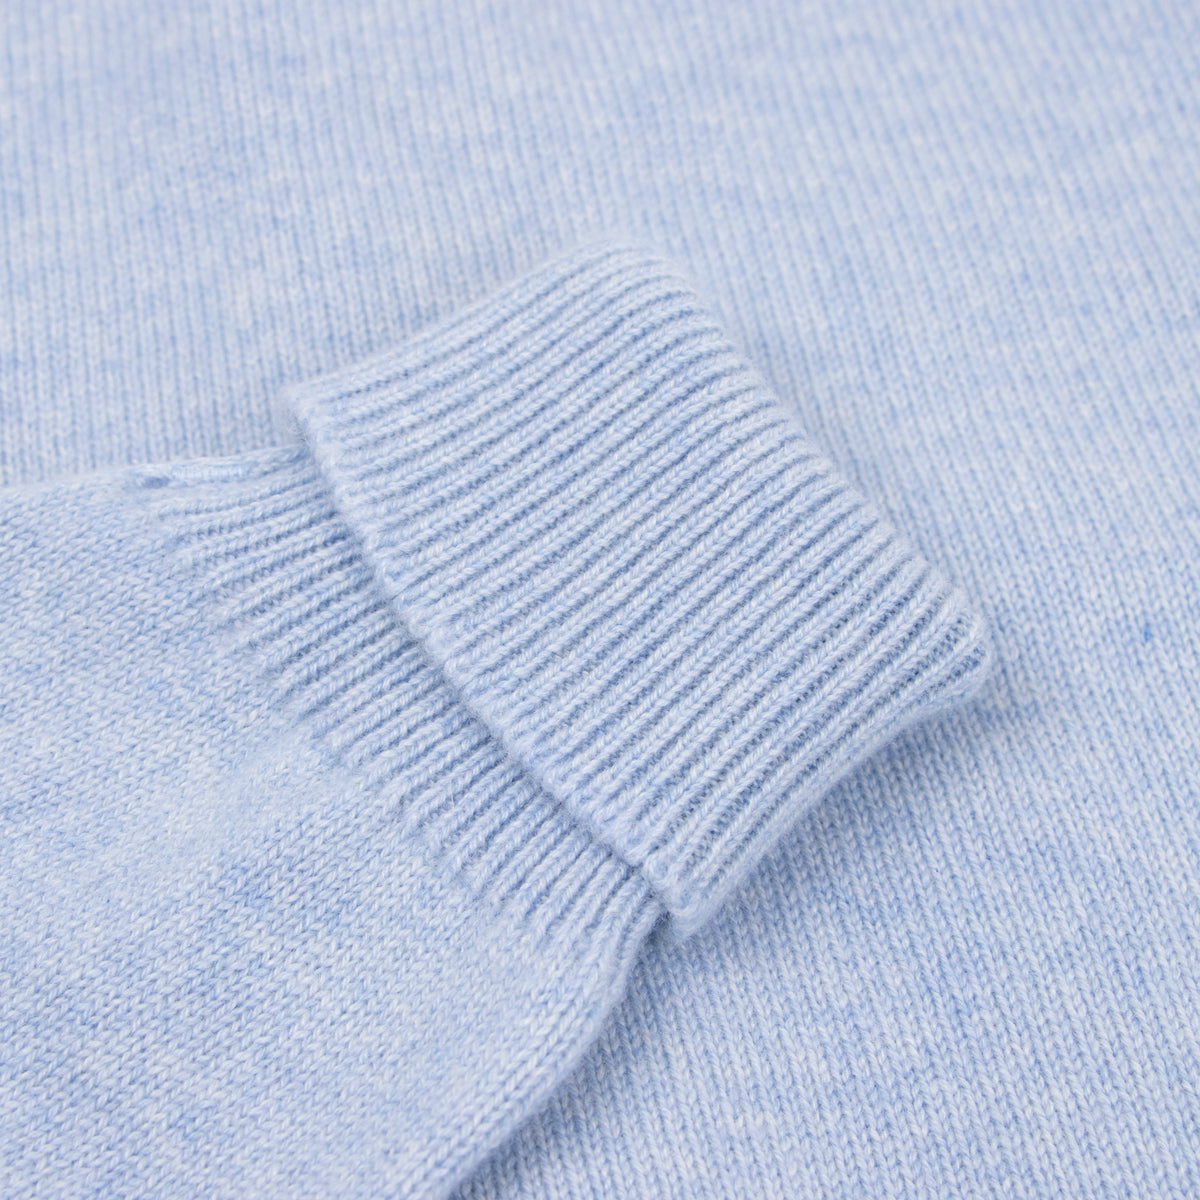 The Barra 4ply Full Zip Cashmere Cardigan - Atollo Blue / White Undyed  Robert Old   